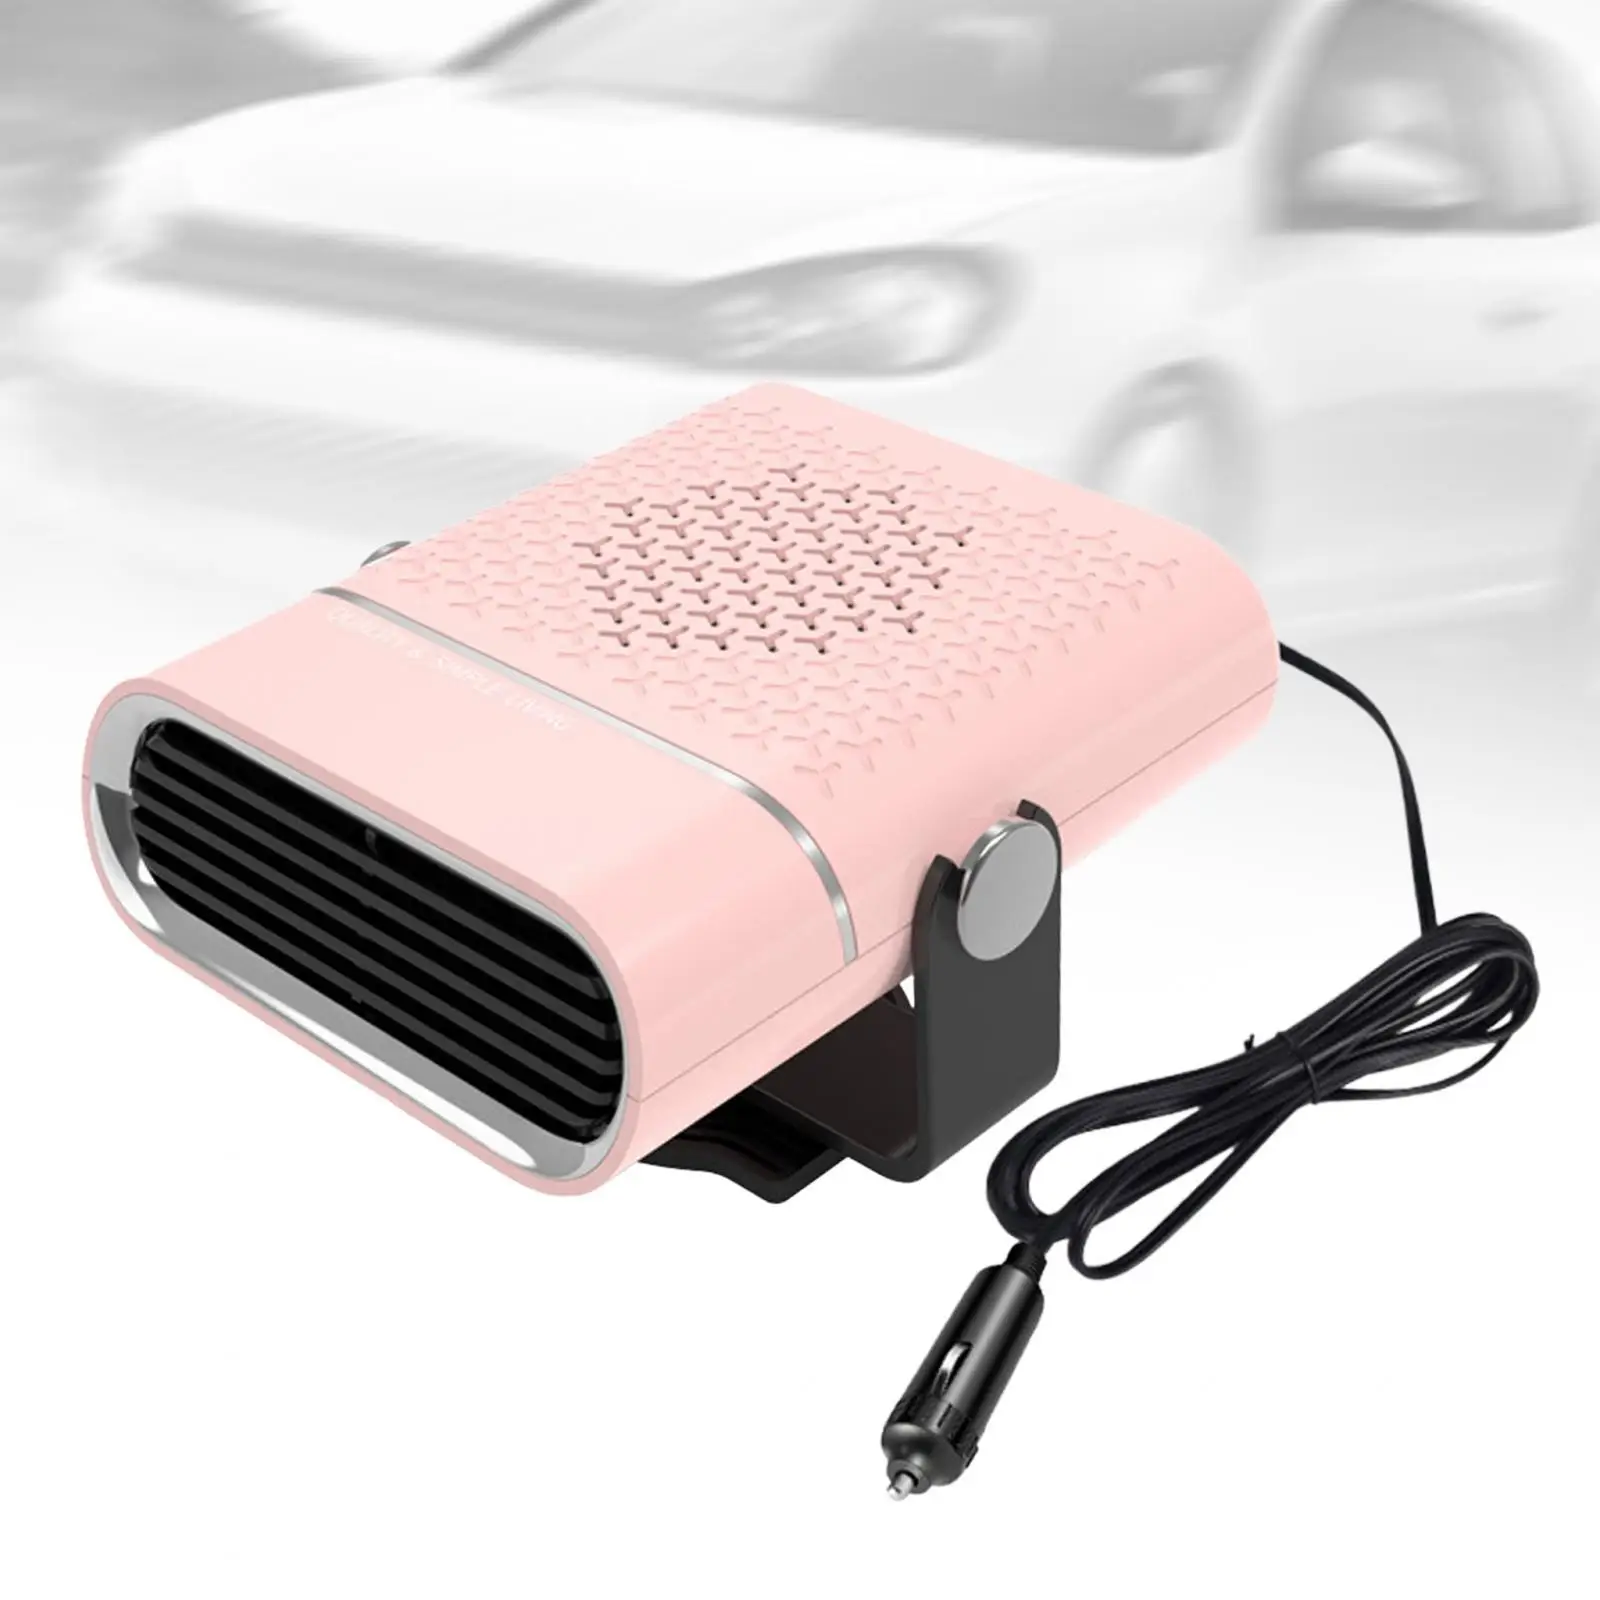 Car Heater 24V Heating and Cooling Windshield Defroster Plug into Cigarette Lighter Auto Vehicle Heater Car Heater and Defroster